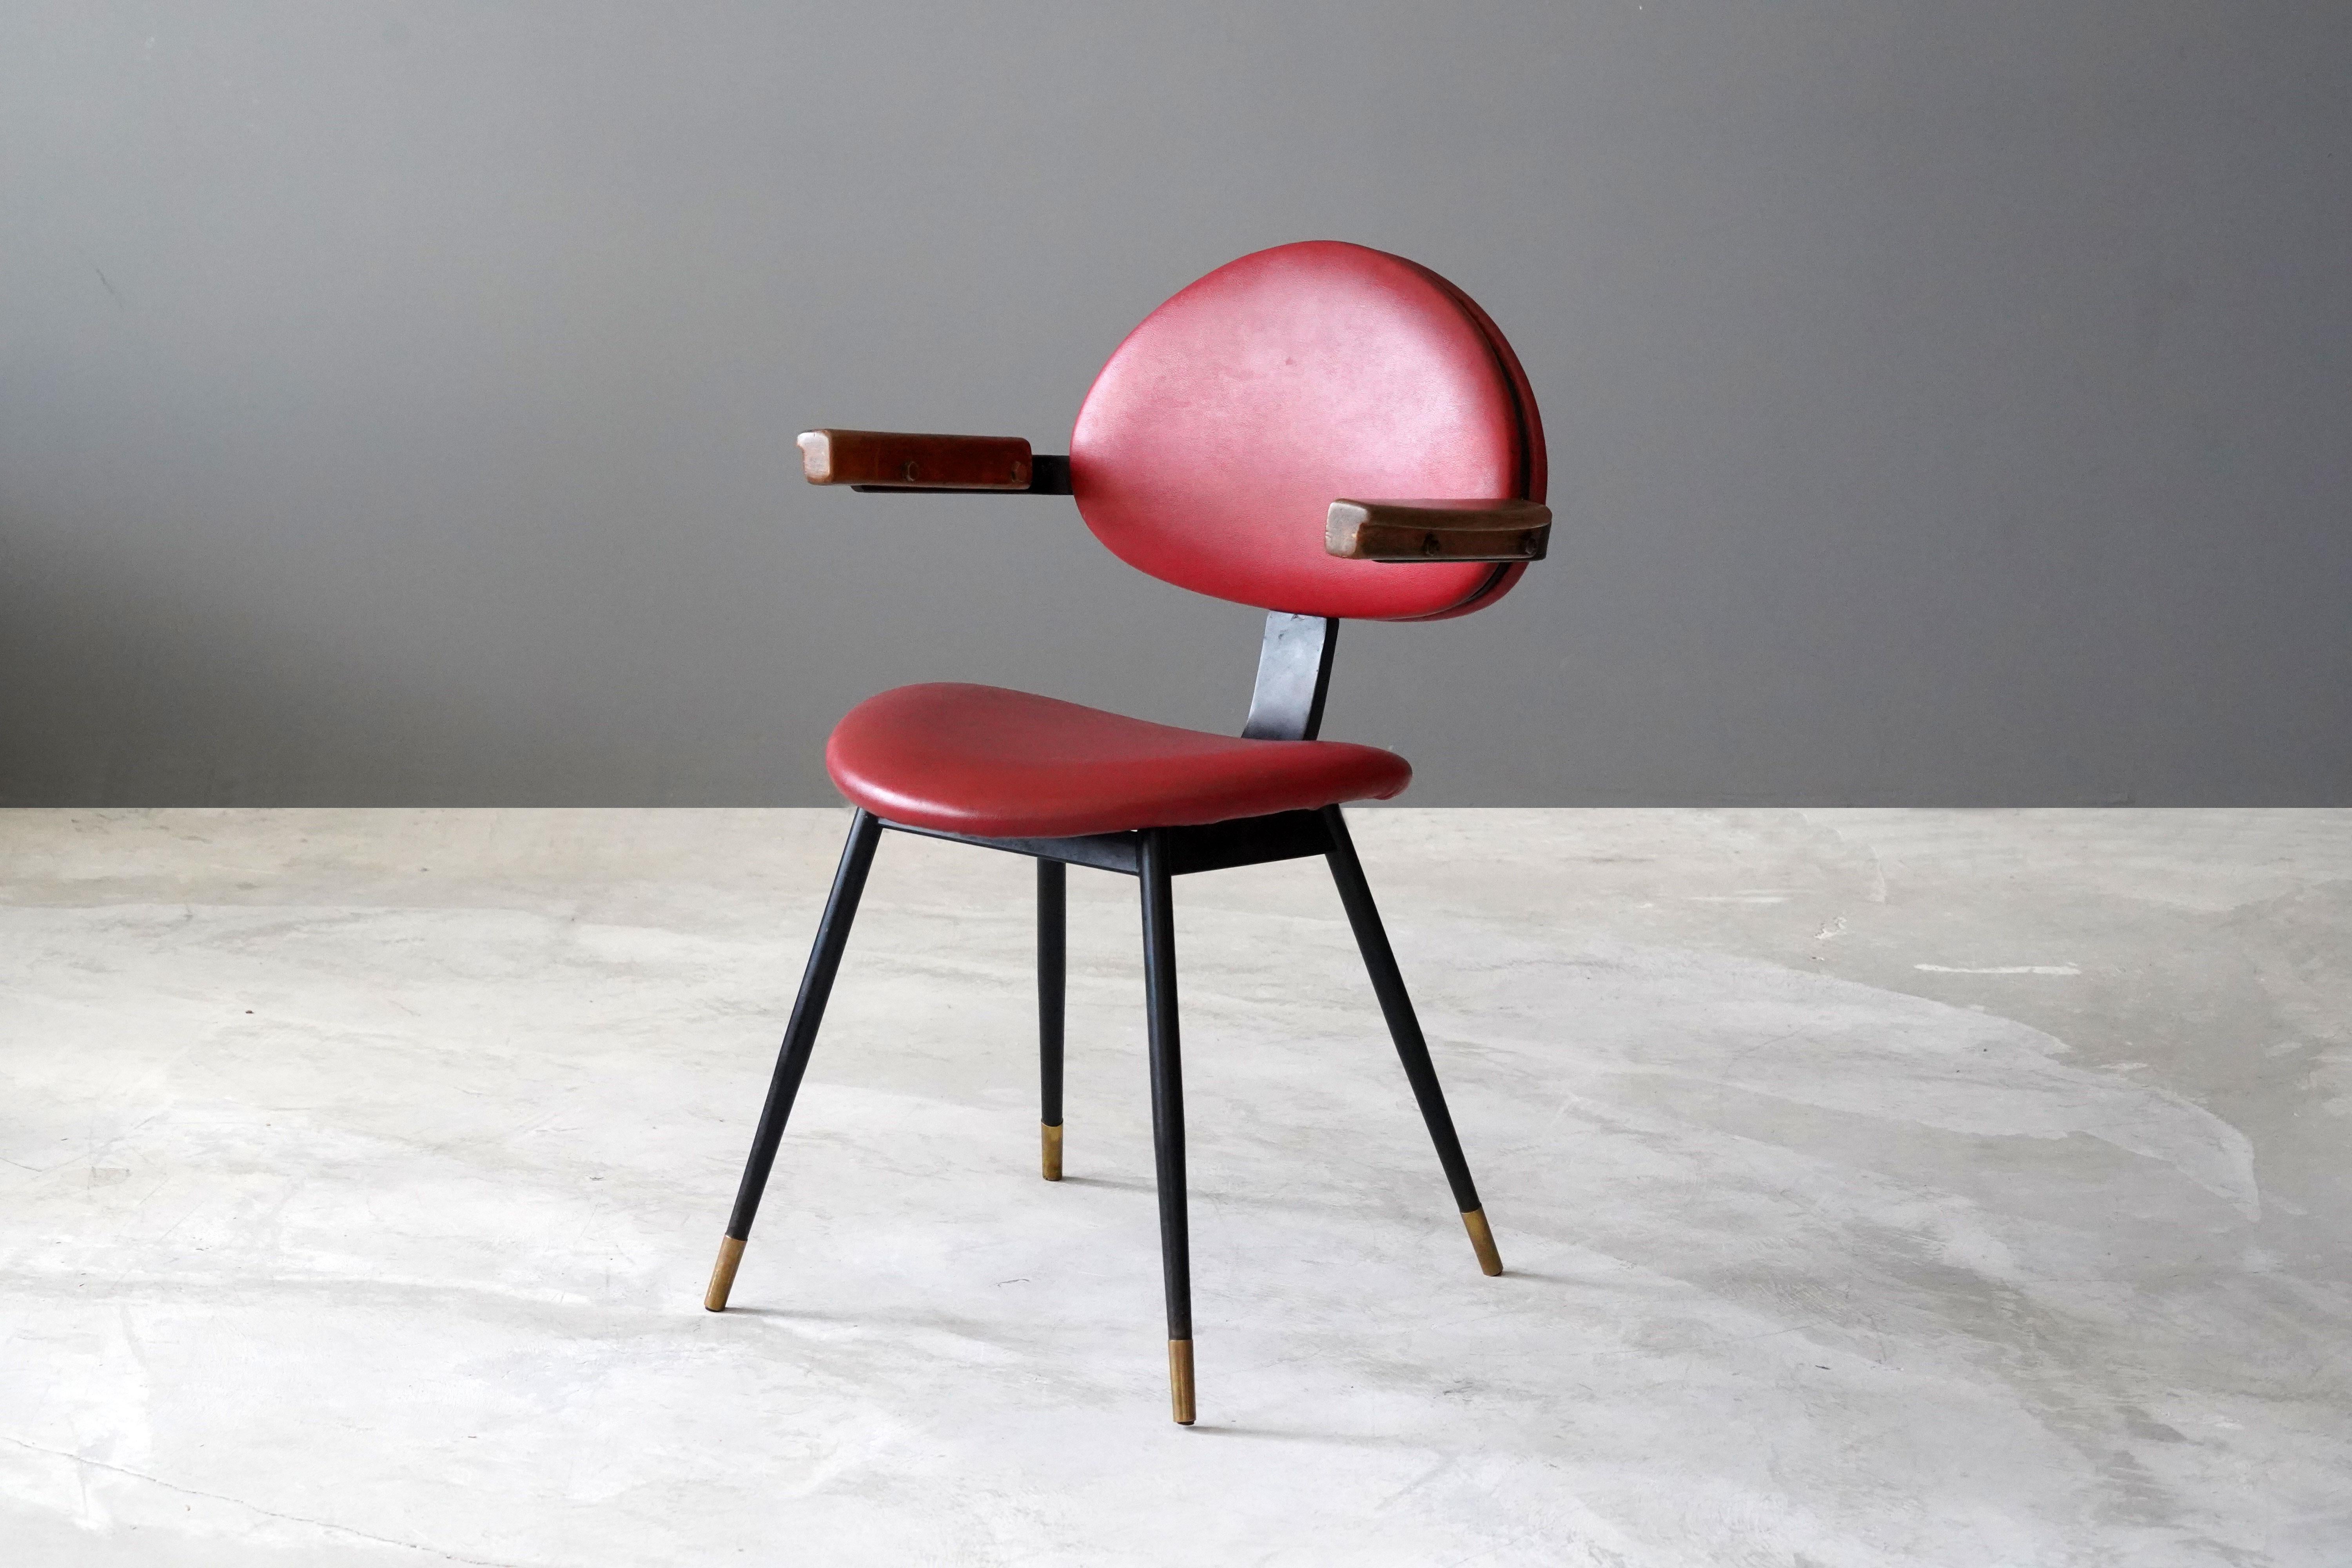 A rare side chair designed by Carlo Mollino for the Lutrario ballroom, Turin, Italy, in 1959. In painted tubular iron, painted iron, Resinflex, oak. Produced by Doro.

Fulvio Ferrari, the leading expert on Carlo Mollino, described the Lutrario